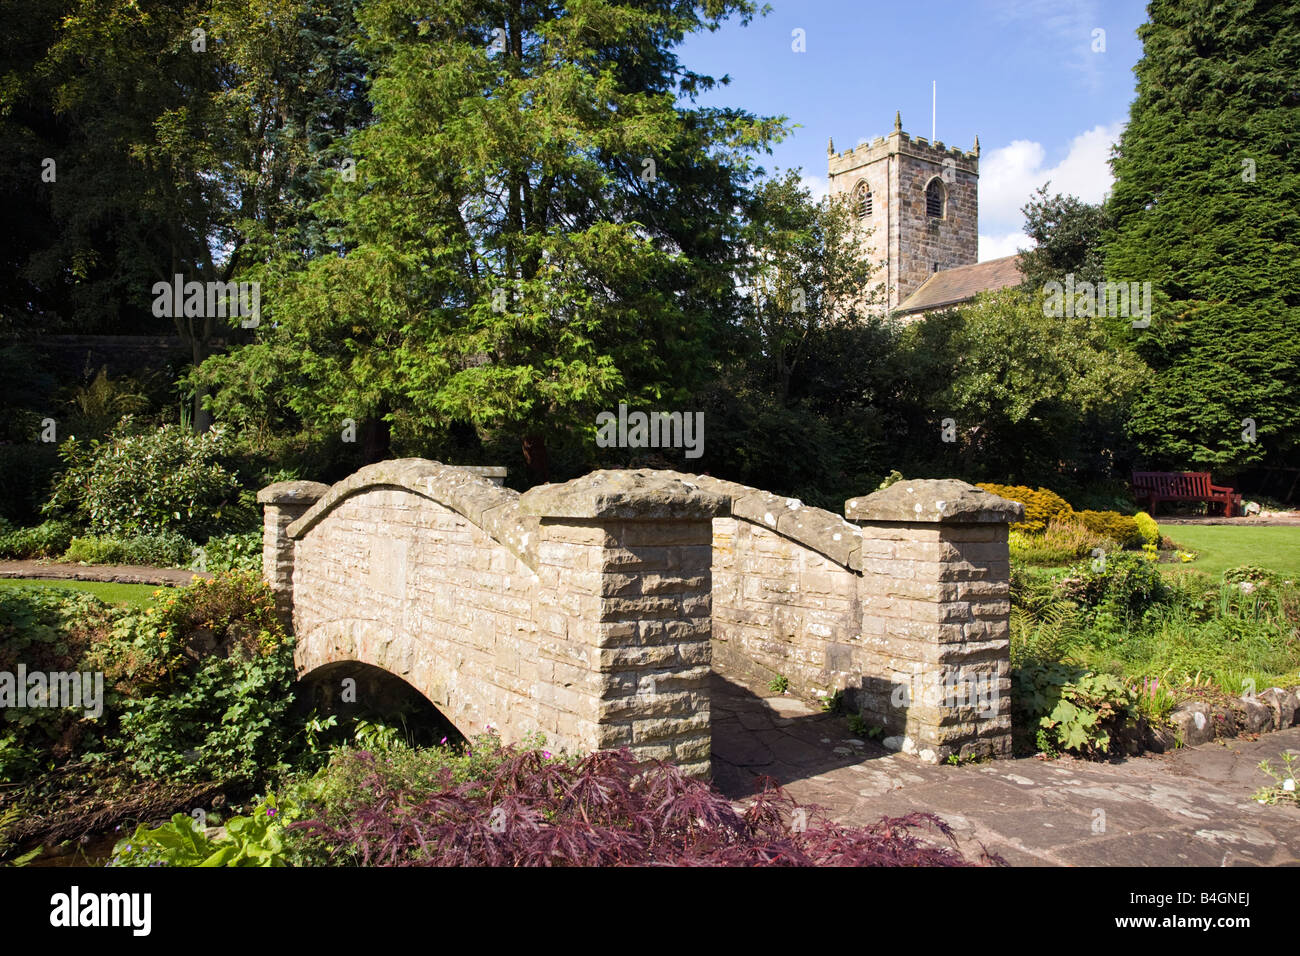 Bridge in Coronation gardens in the village of Waddington Lancashire with St Helens Church in background Stock Photo